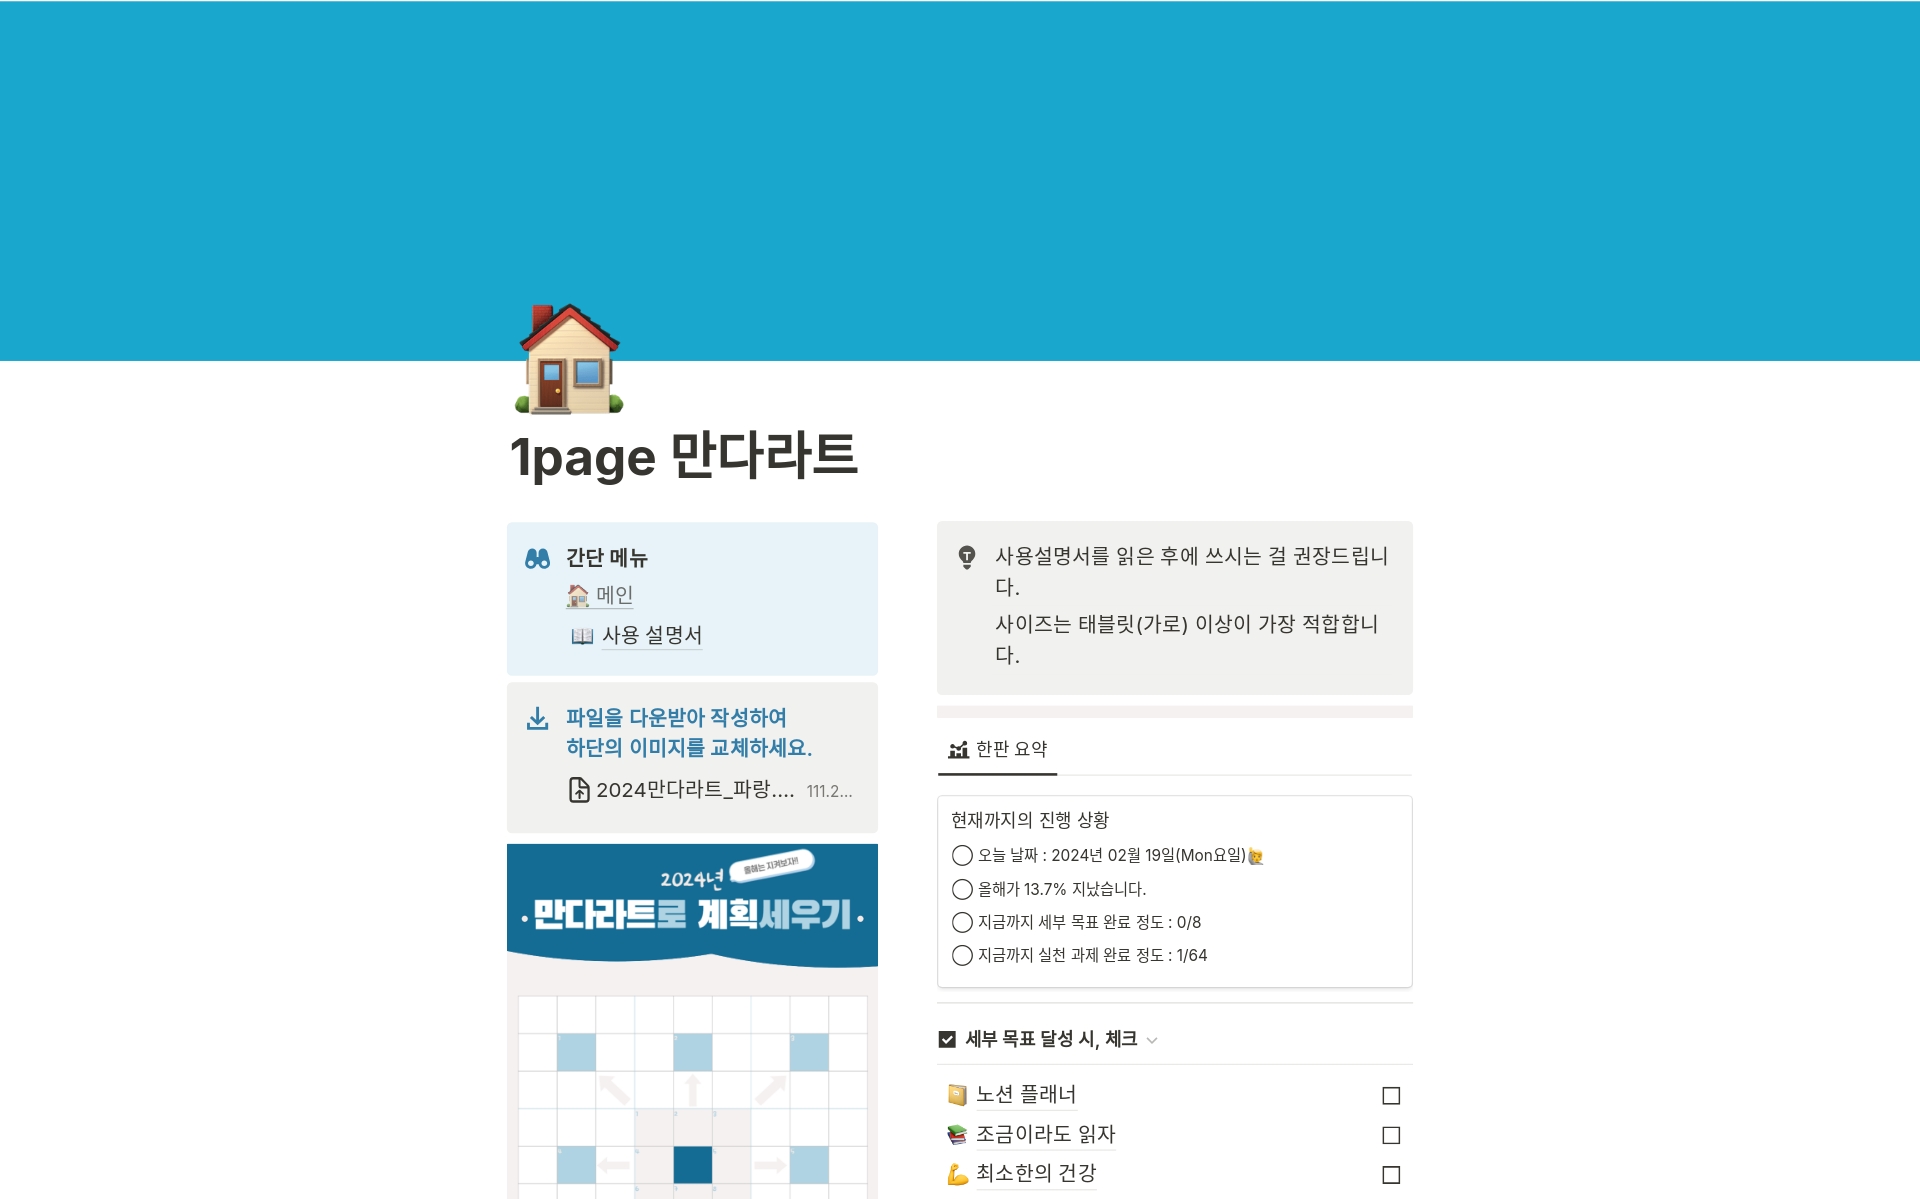 A template preview for 1page 만다라트